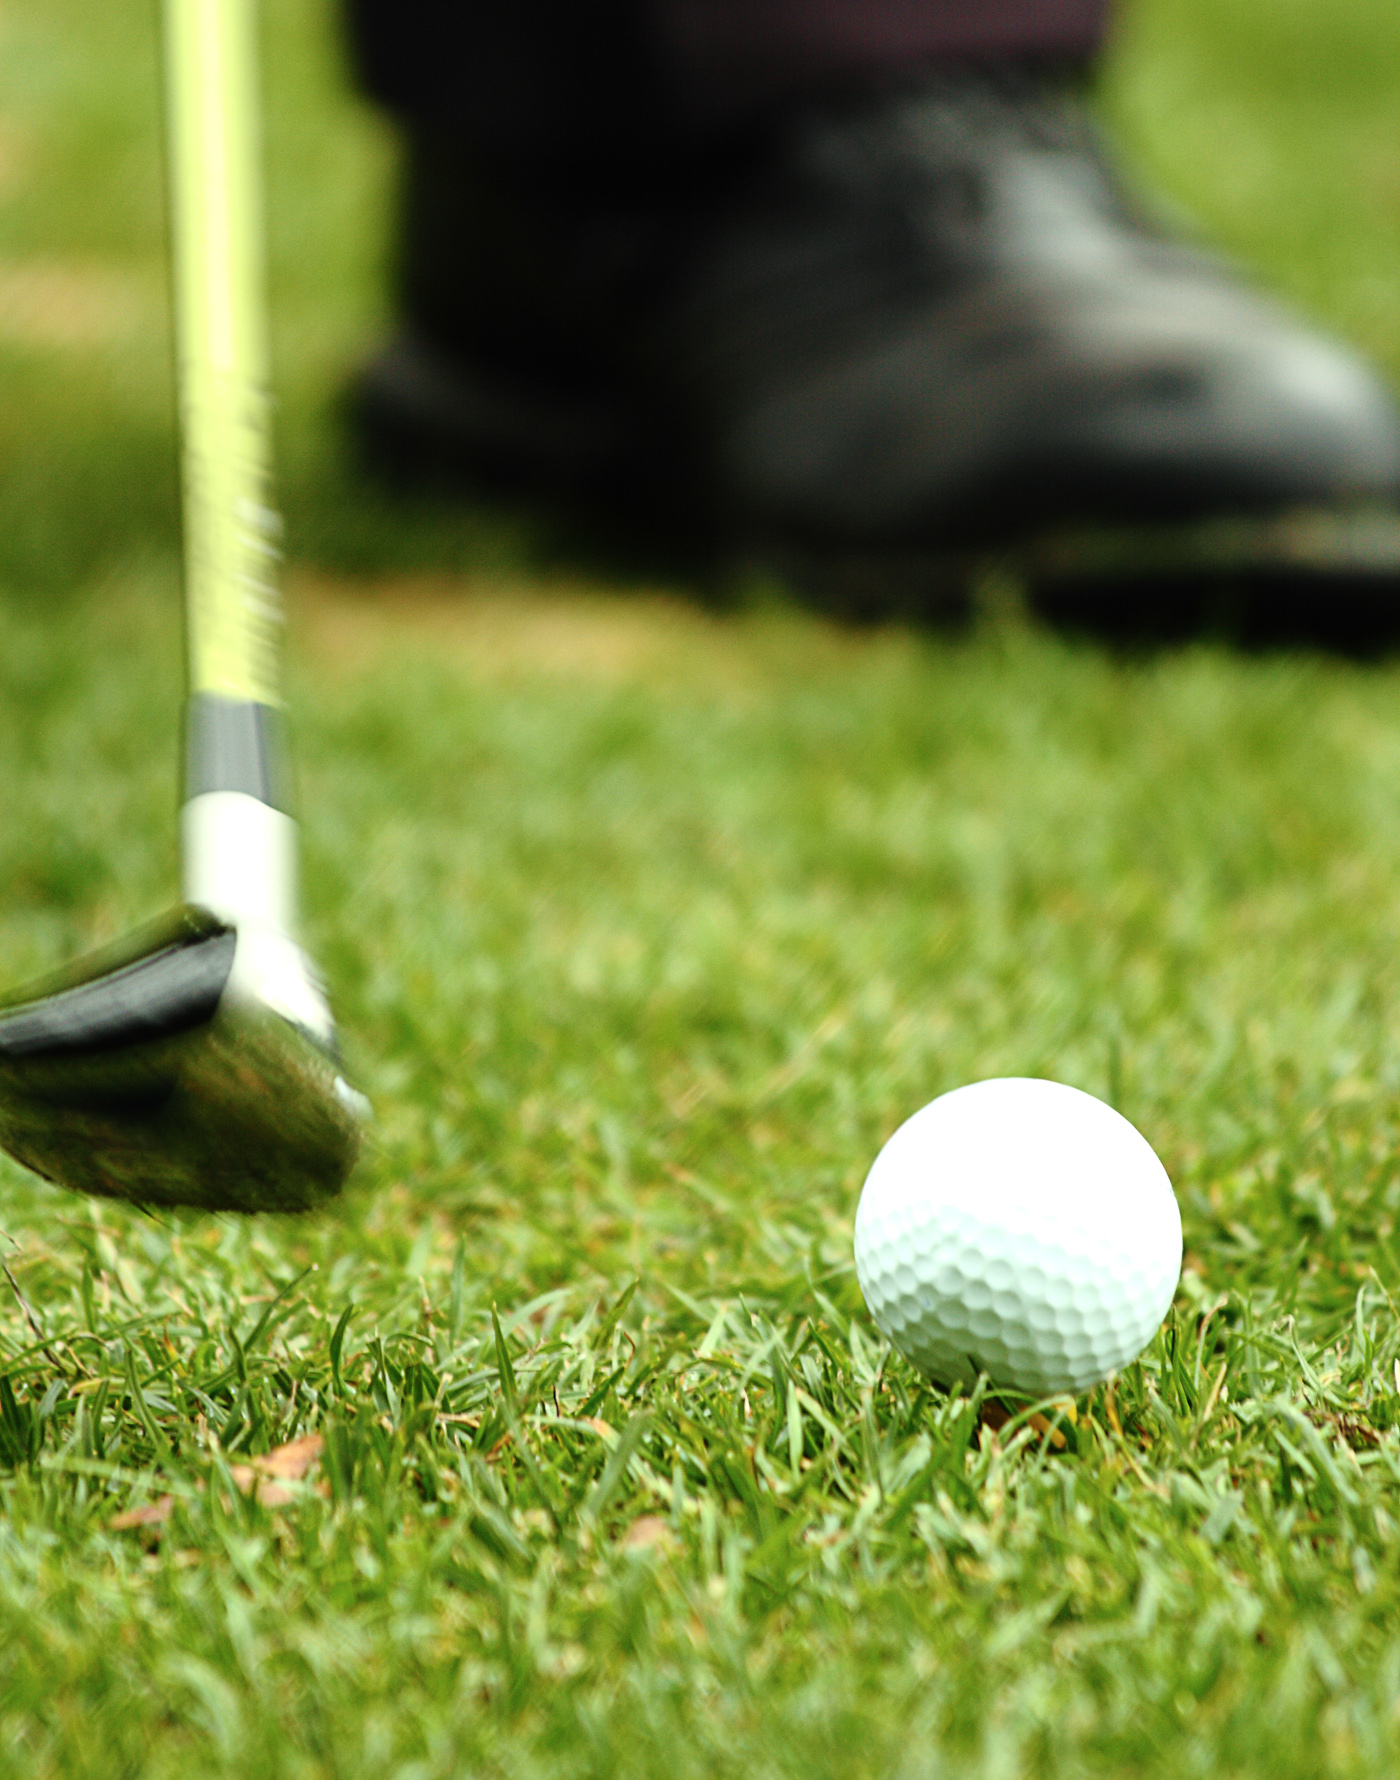 Free photo: Driving A Golf Ball From The Tee - Activity, Grass, Tee ...